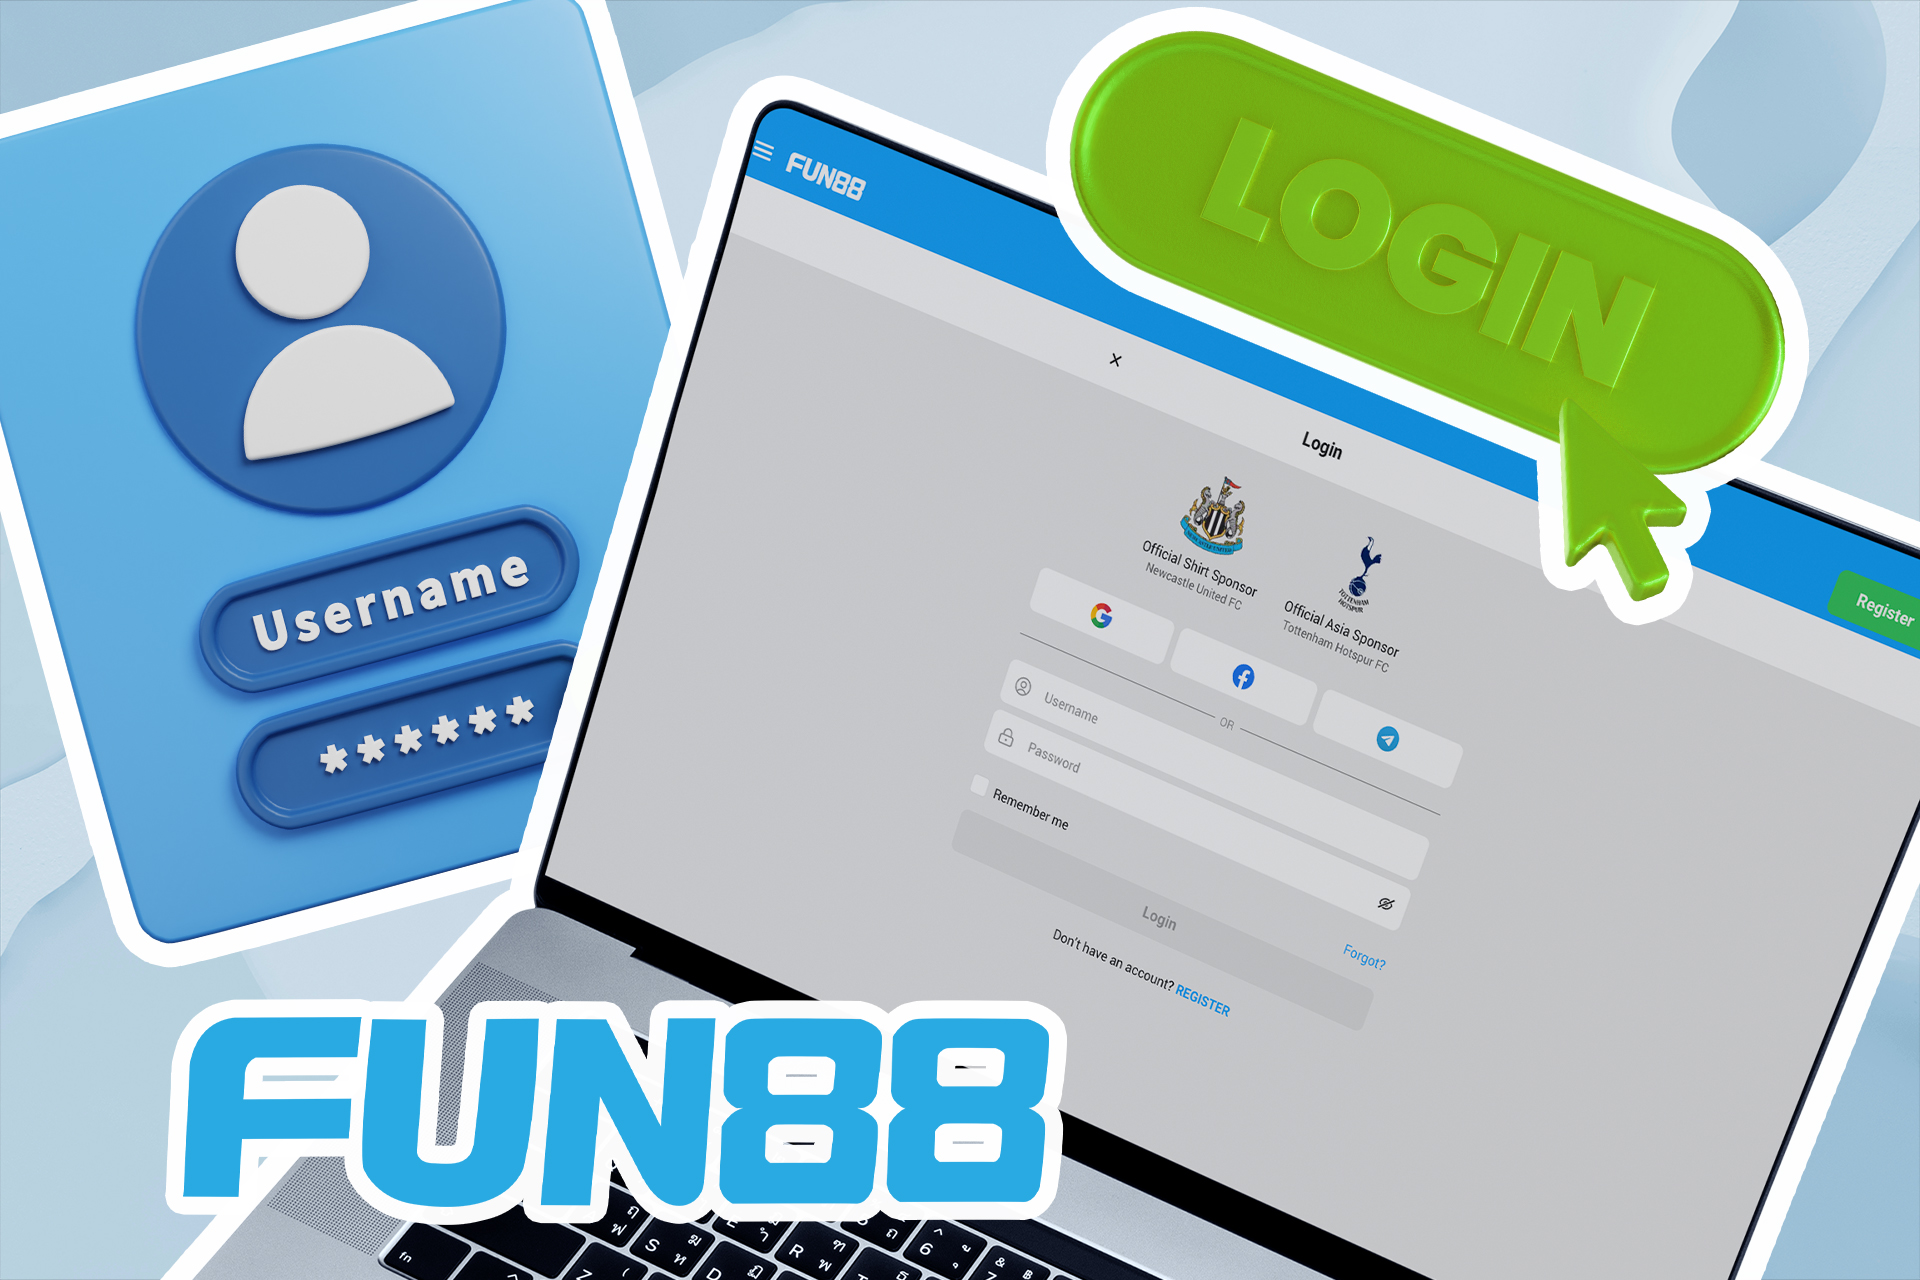 Log in to your Fun88 account with your username and password.